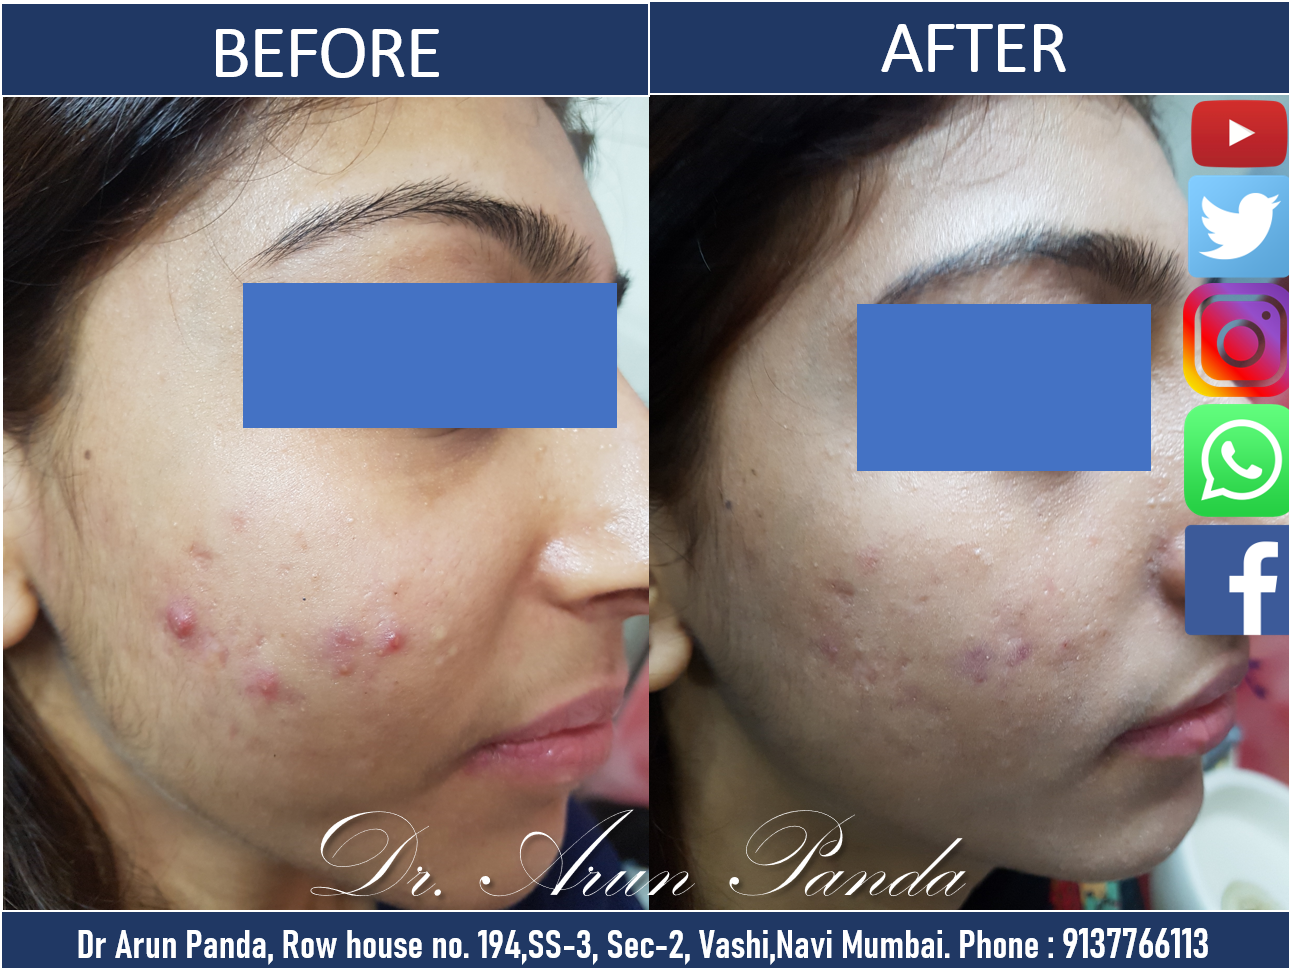 You are currently viewing Acne and Pimple Doctor in Vashi, Navi Mumbai